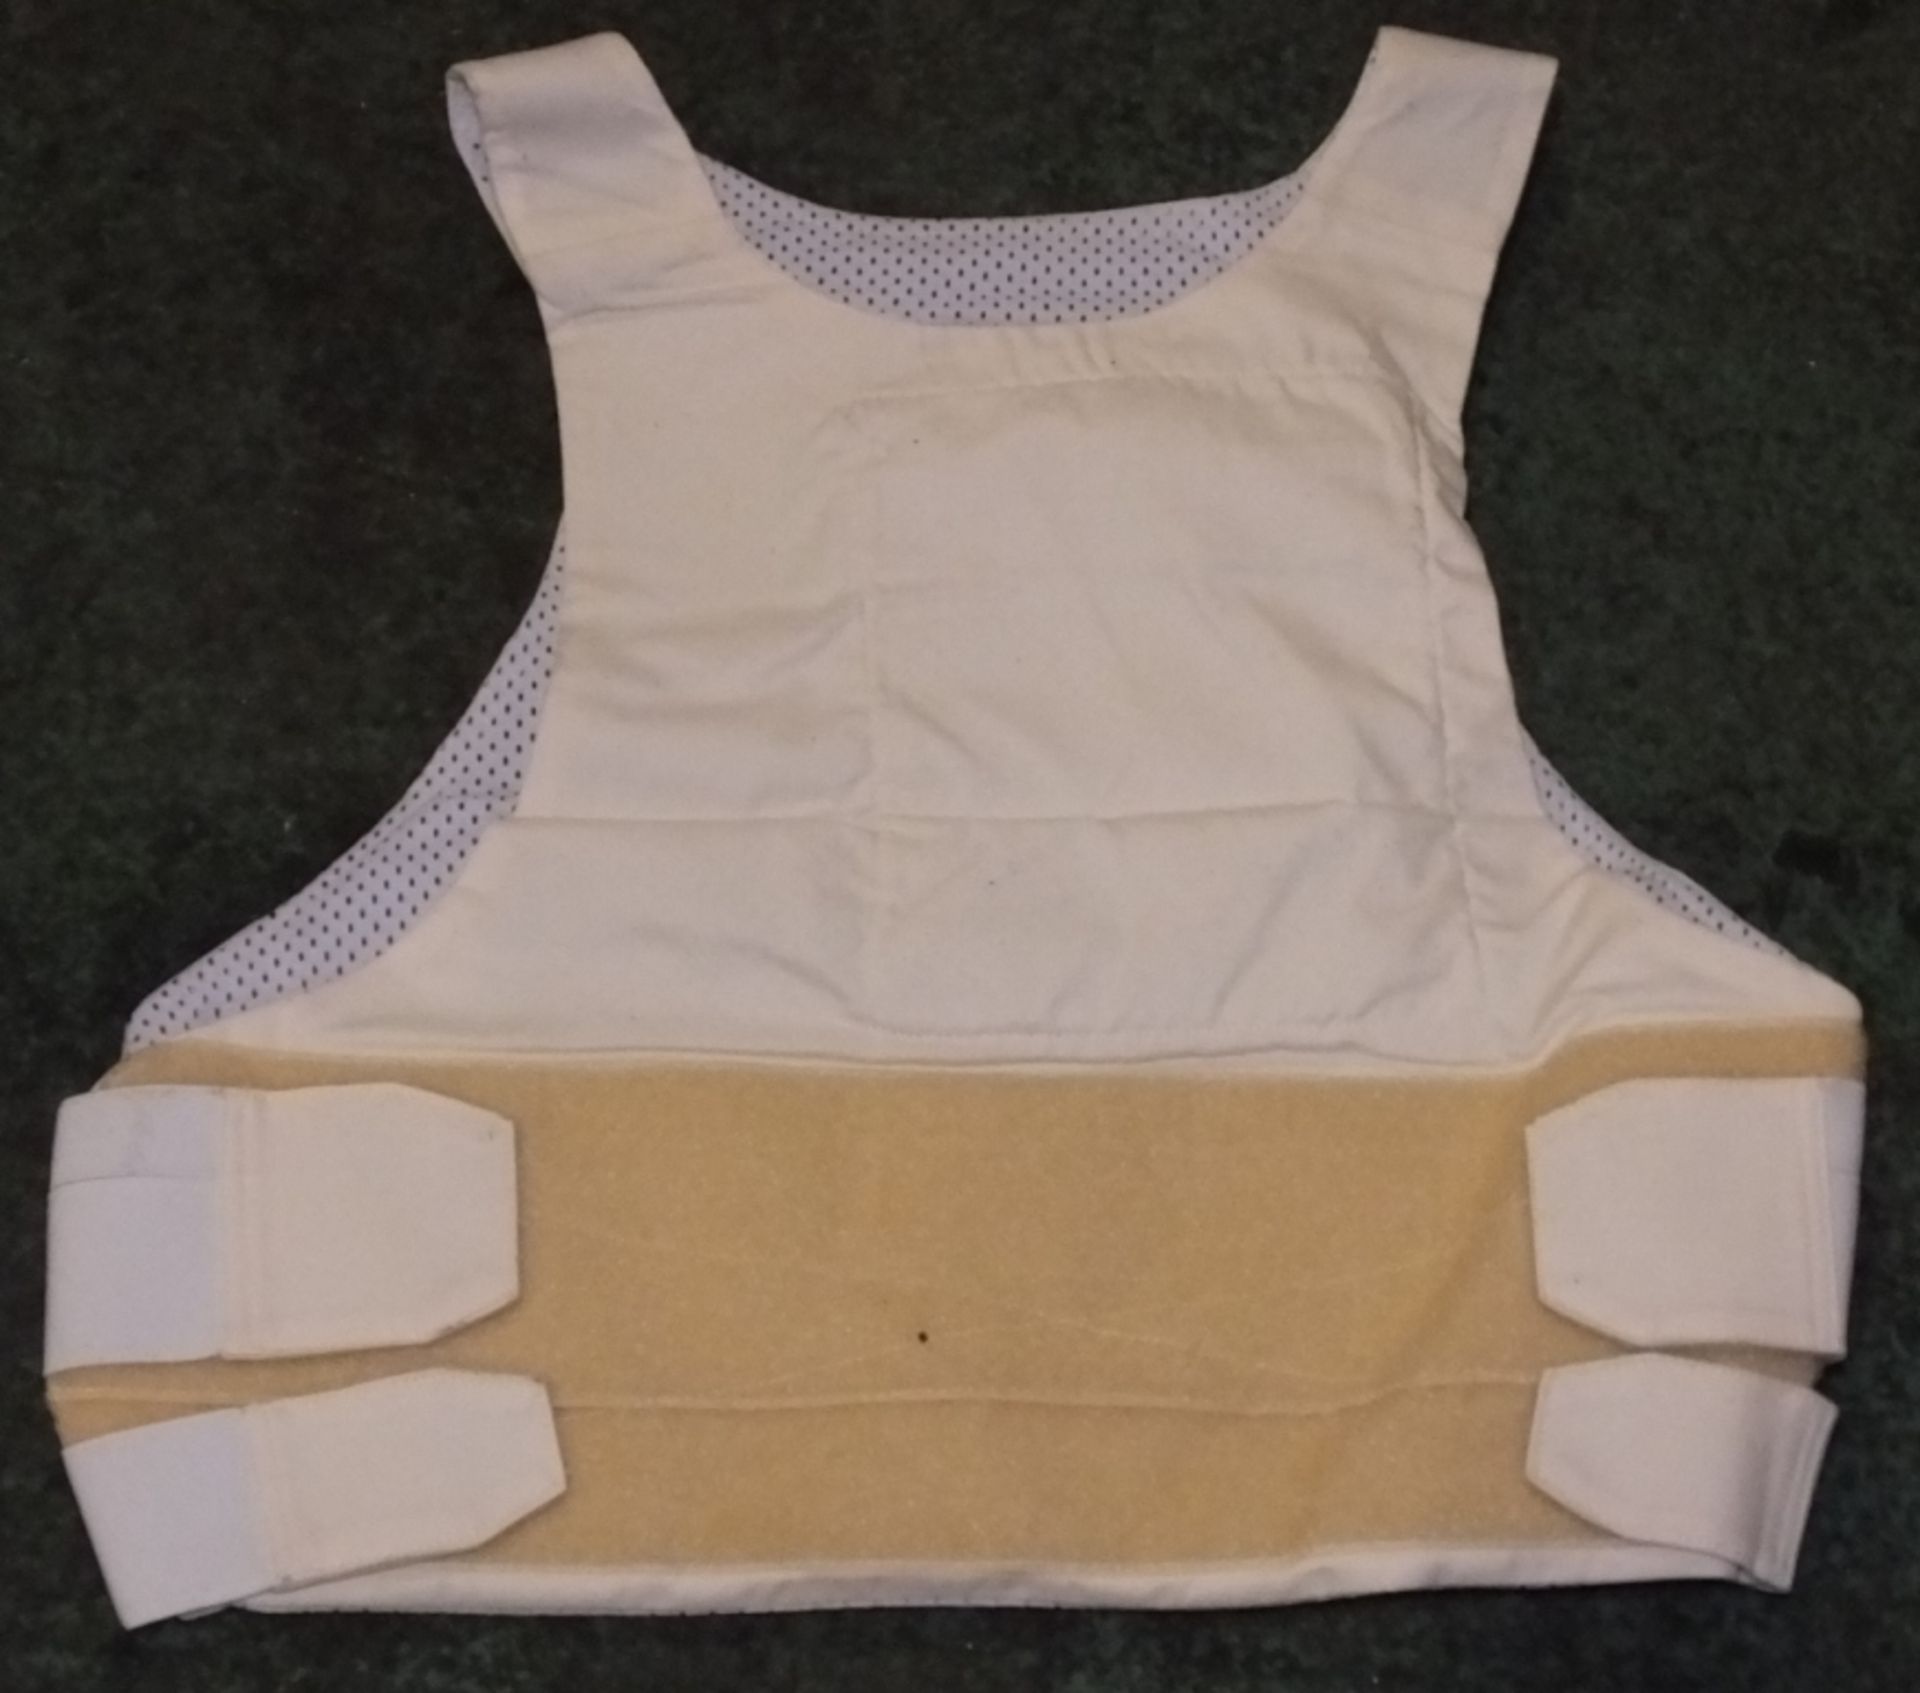 4x Upper body discreet soft armour vest - Image 2 of 3